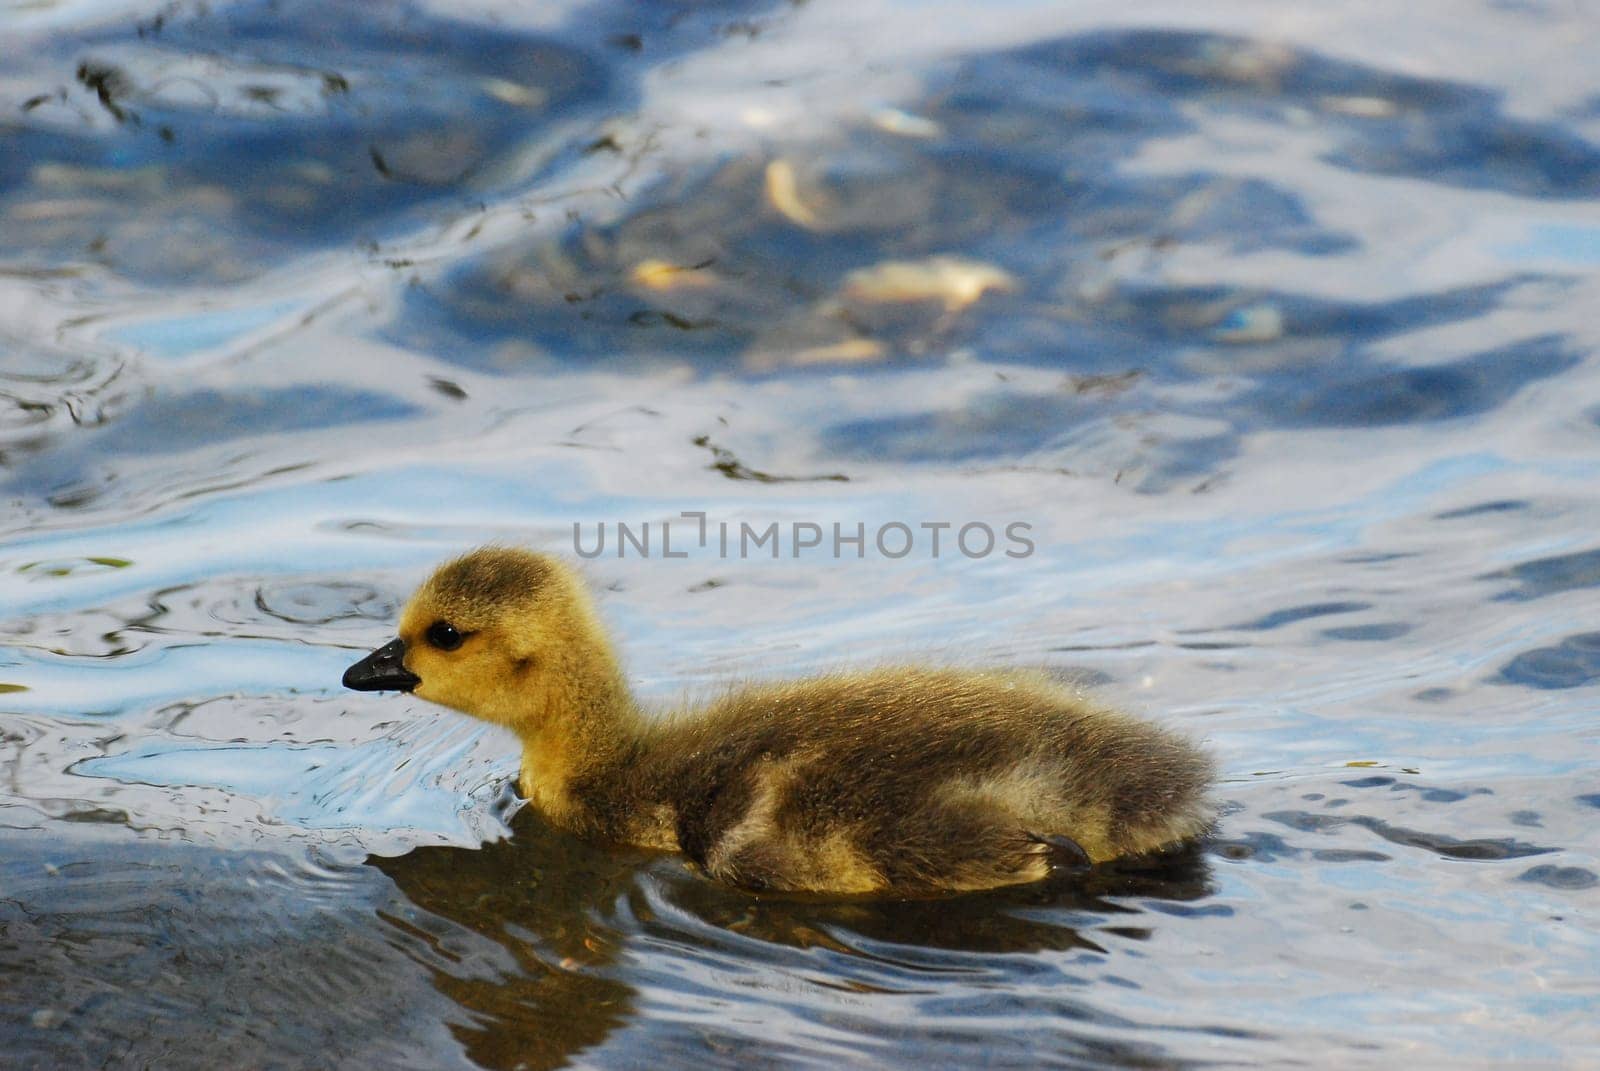 Closeup of a small cute duckling at the Six Lakes Plateau, Duisburg, Germany